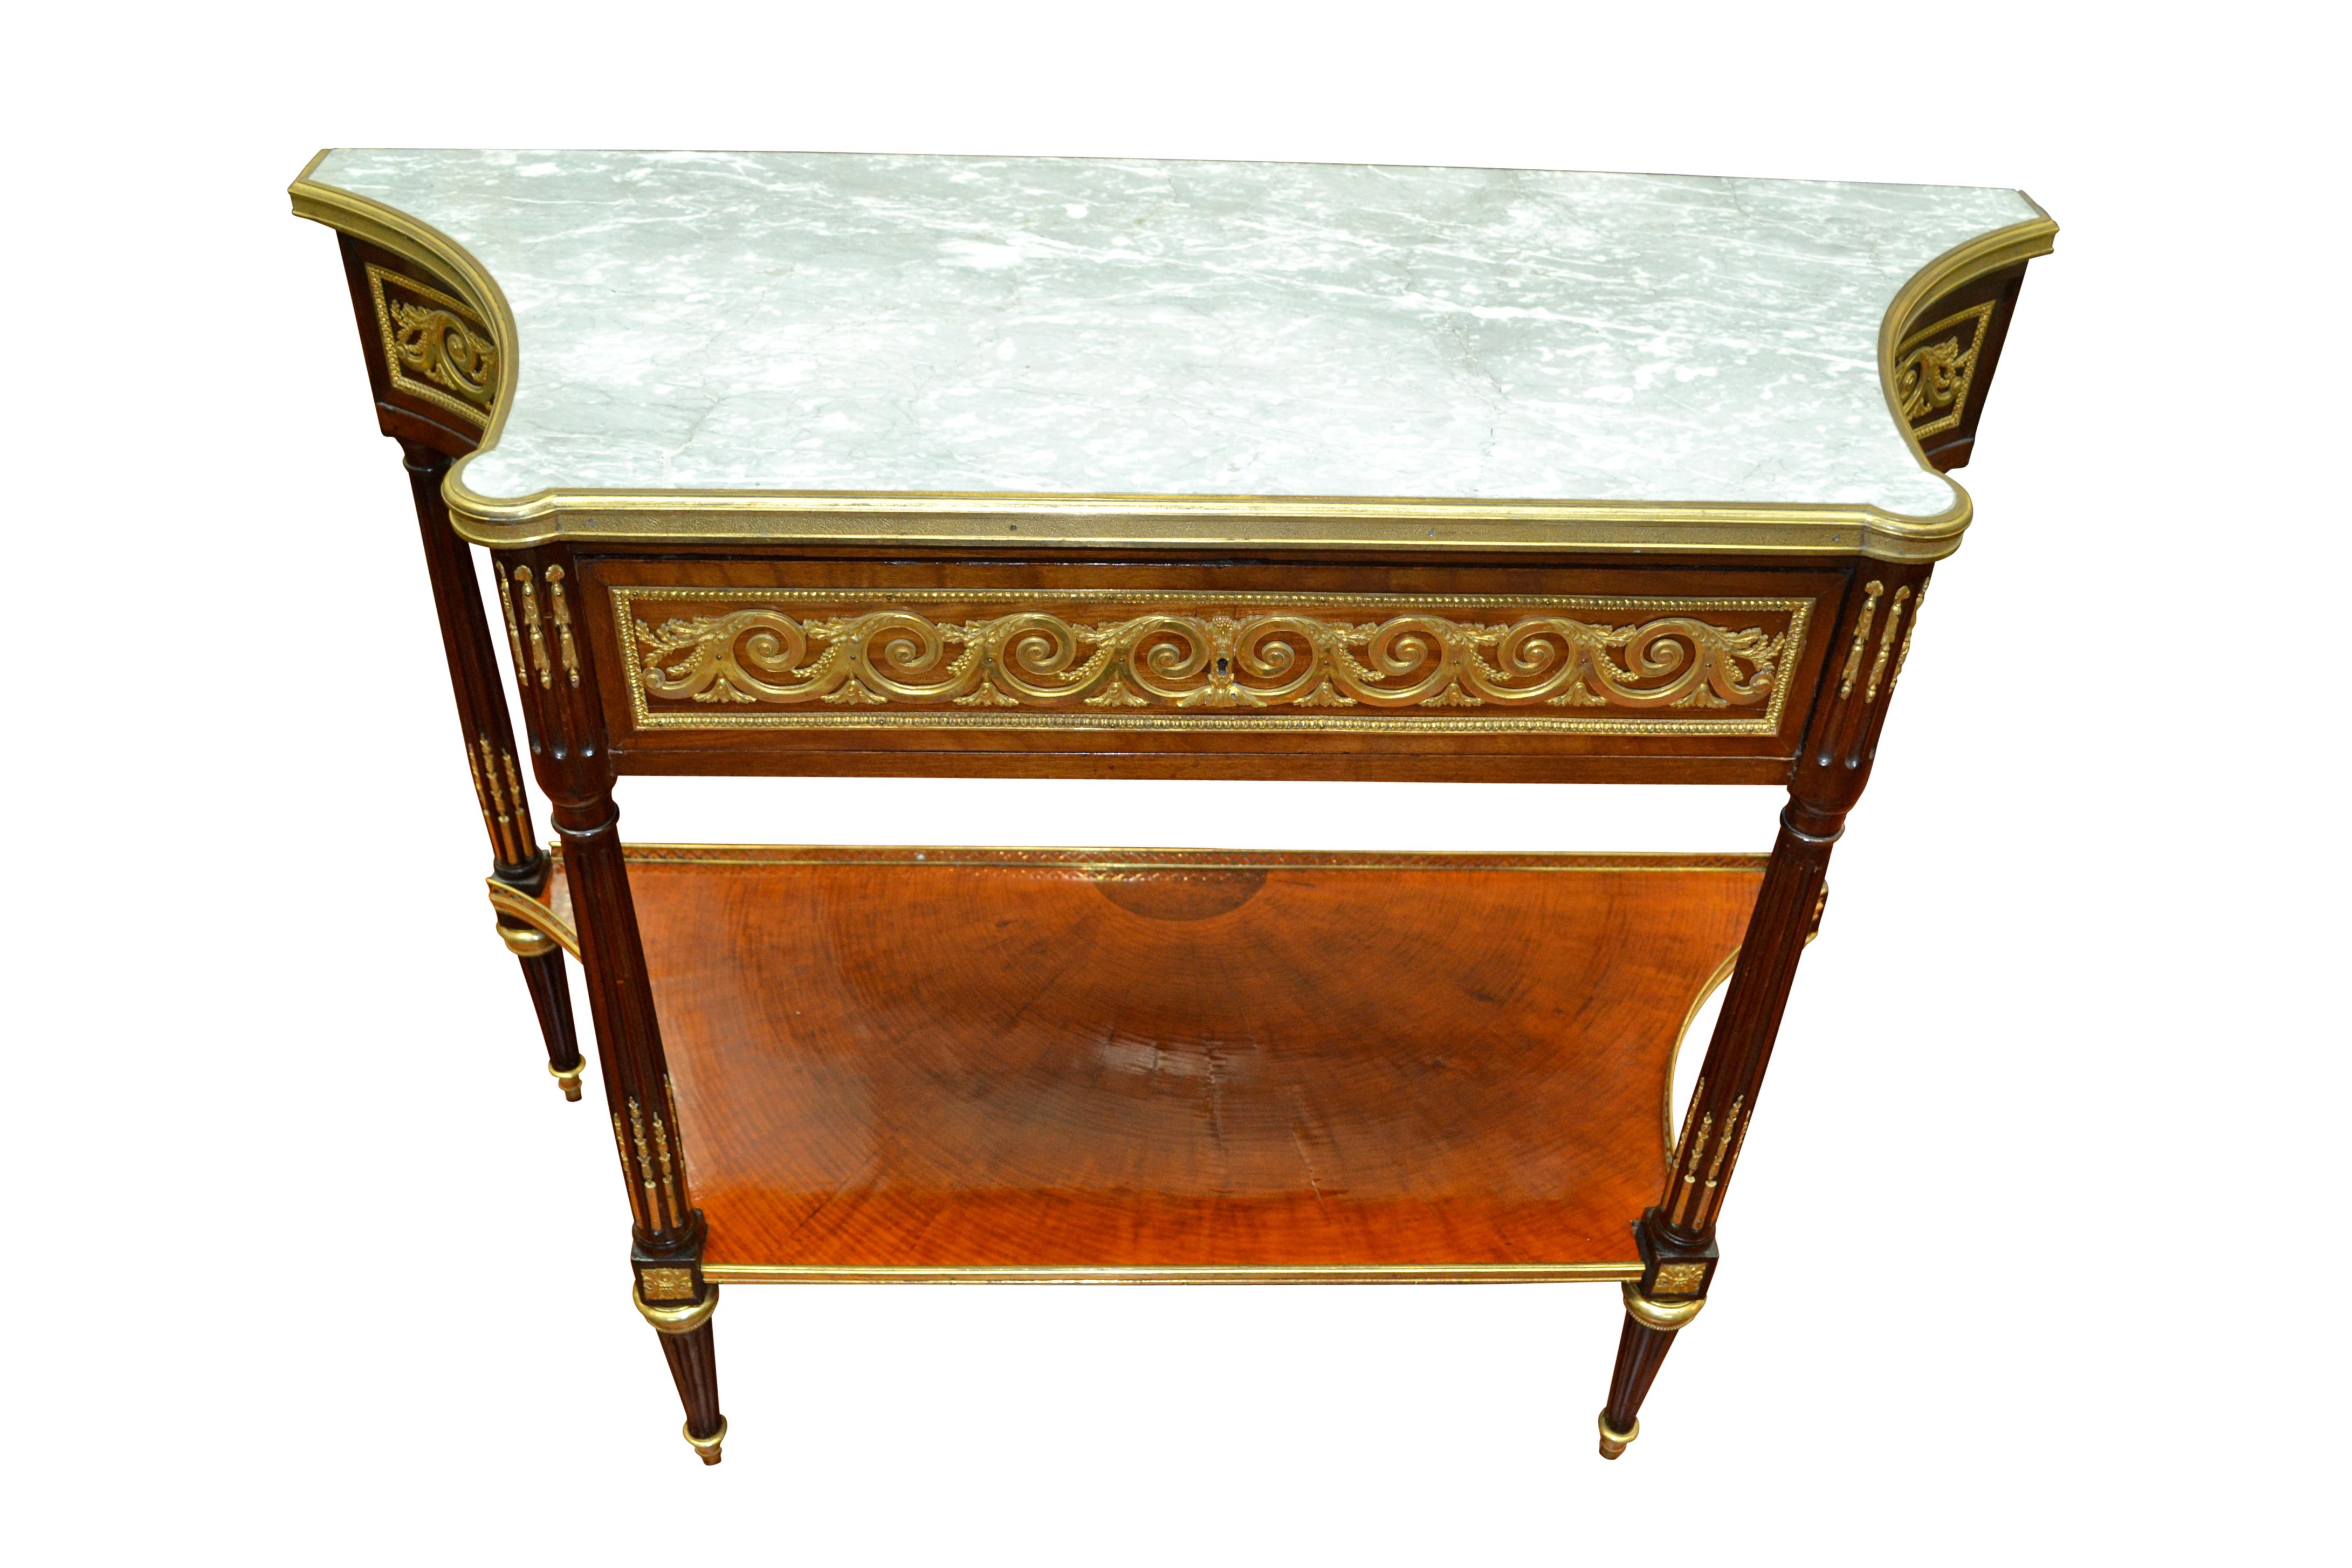 The Louis XVI style dessert table is made of mahogany, the top section richly decorated with gilded bronze Vitruvian scrolls and other decorative mounts, all of Dasson or Linke quality. The top middle section has a single drawer between concave